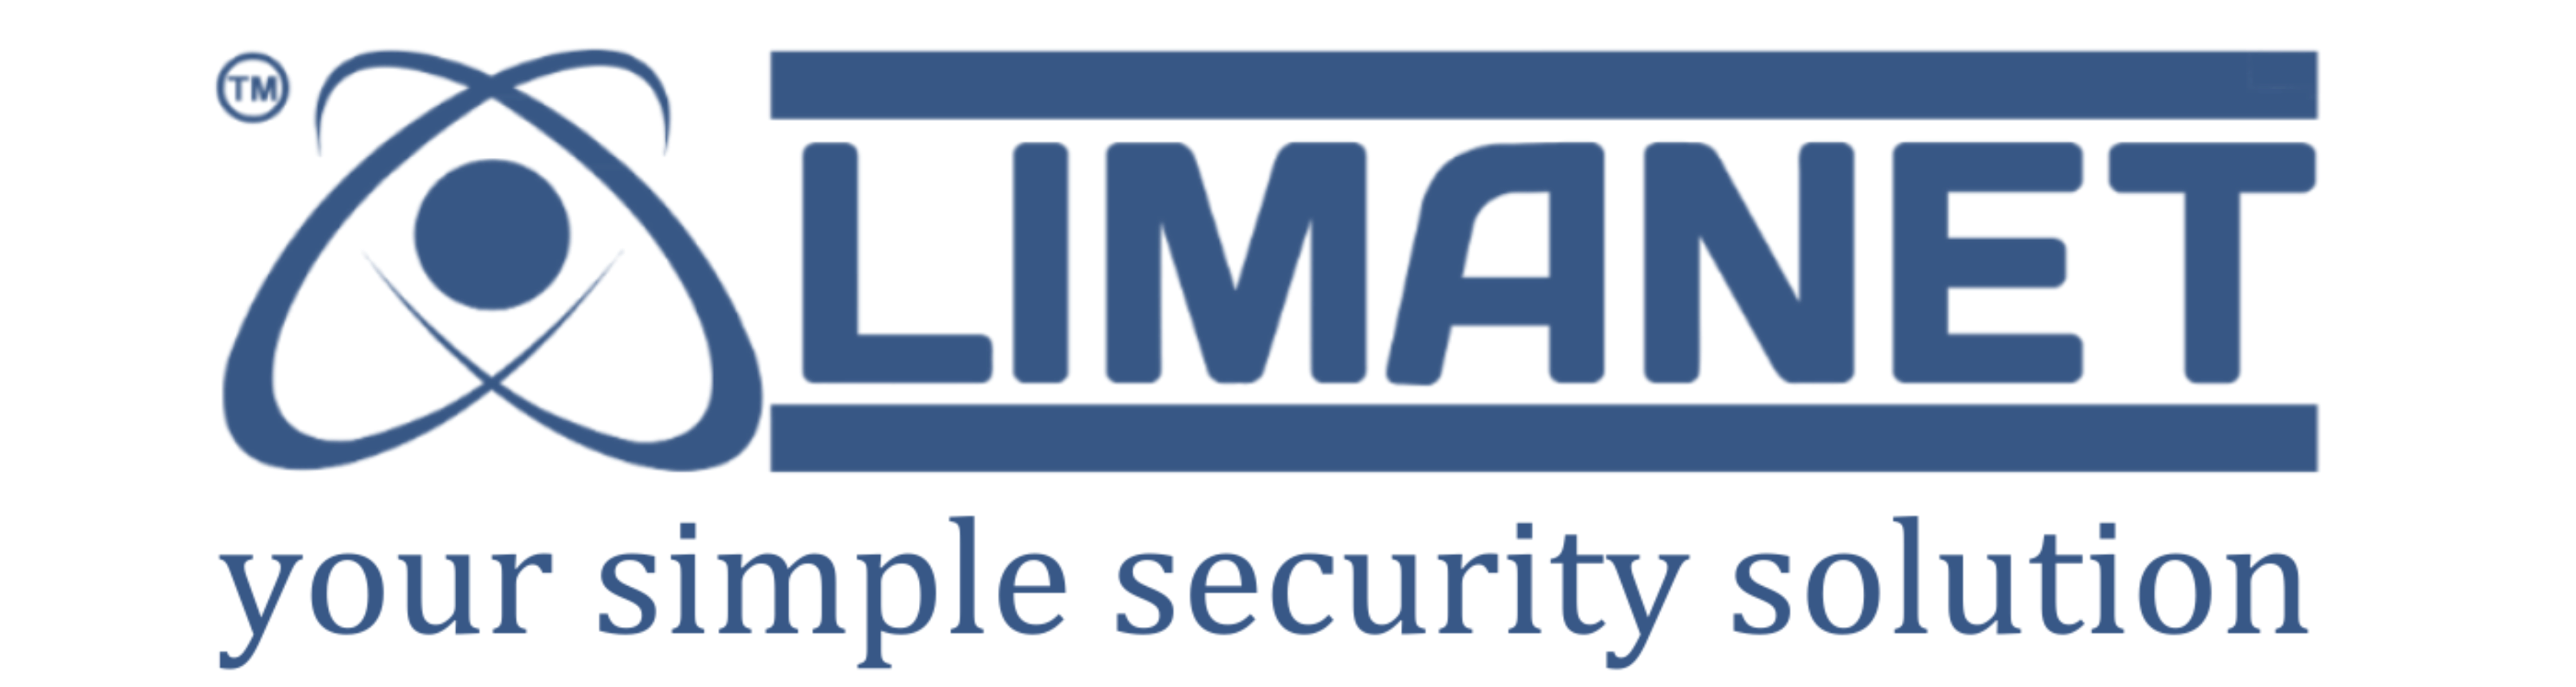 LIMANET – your simple security solution